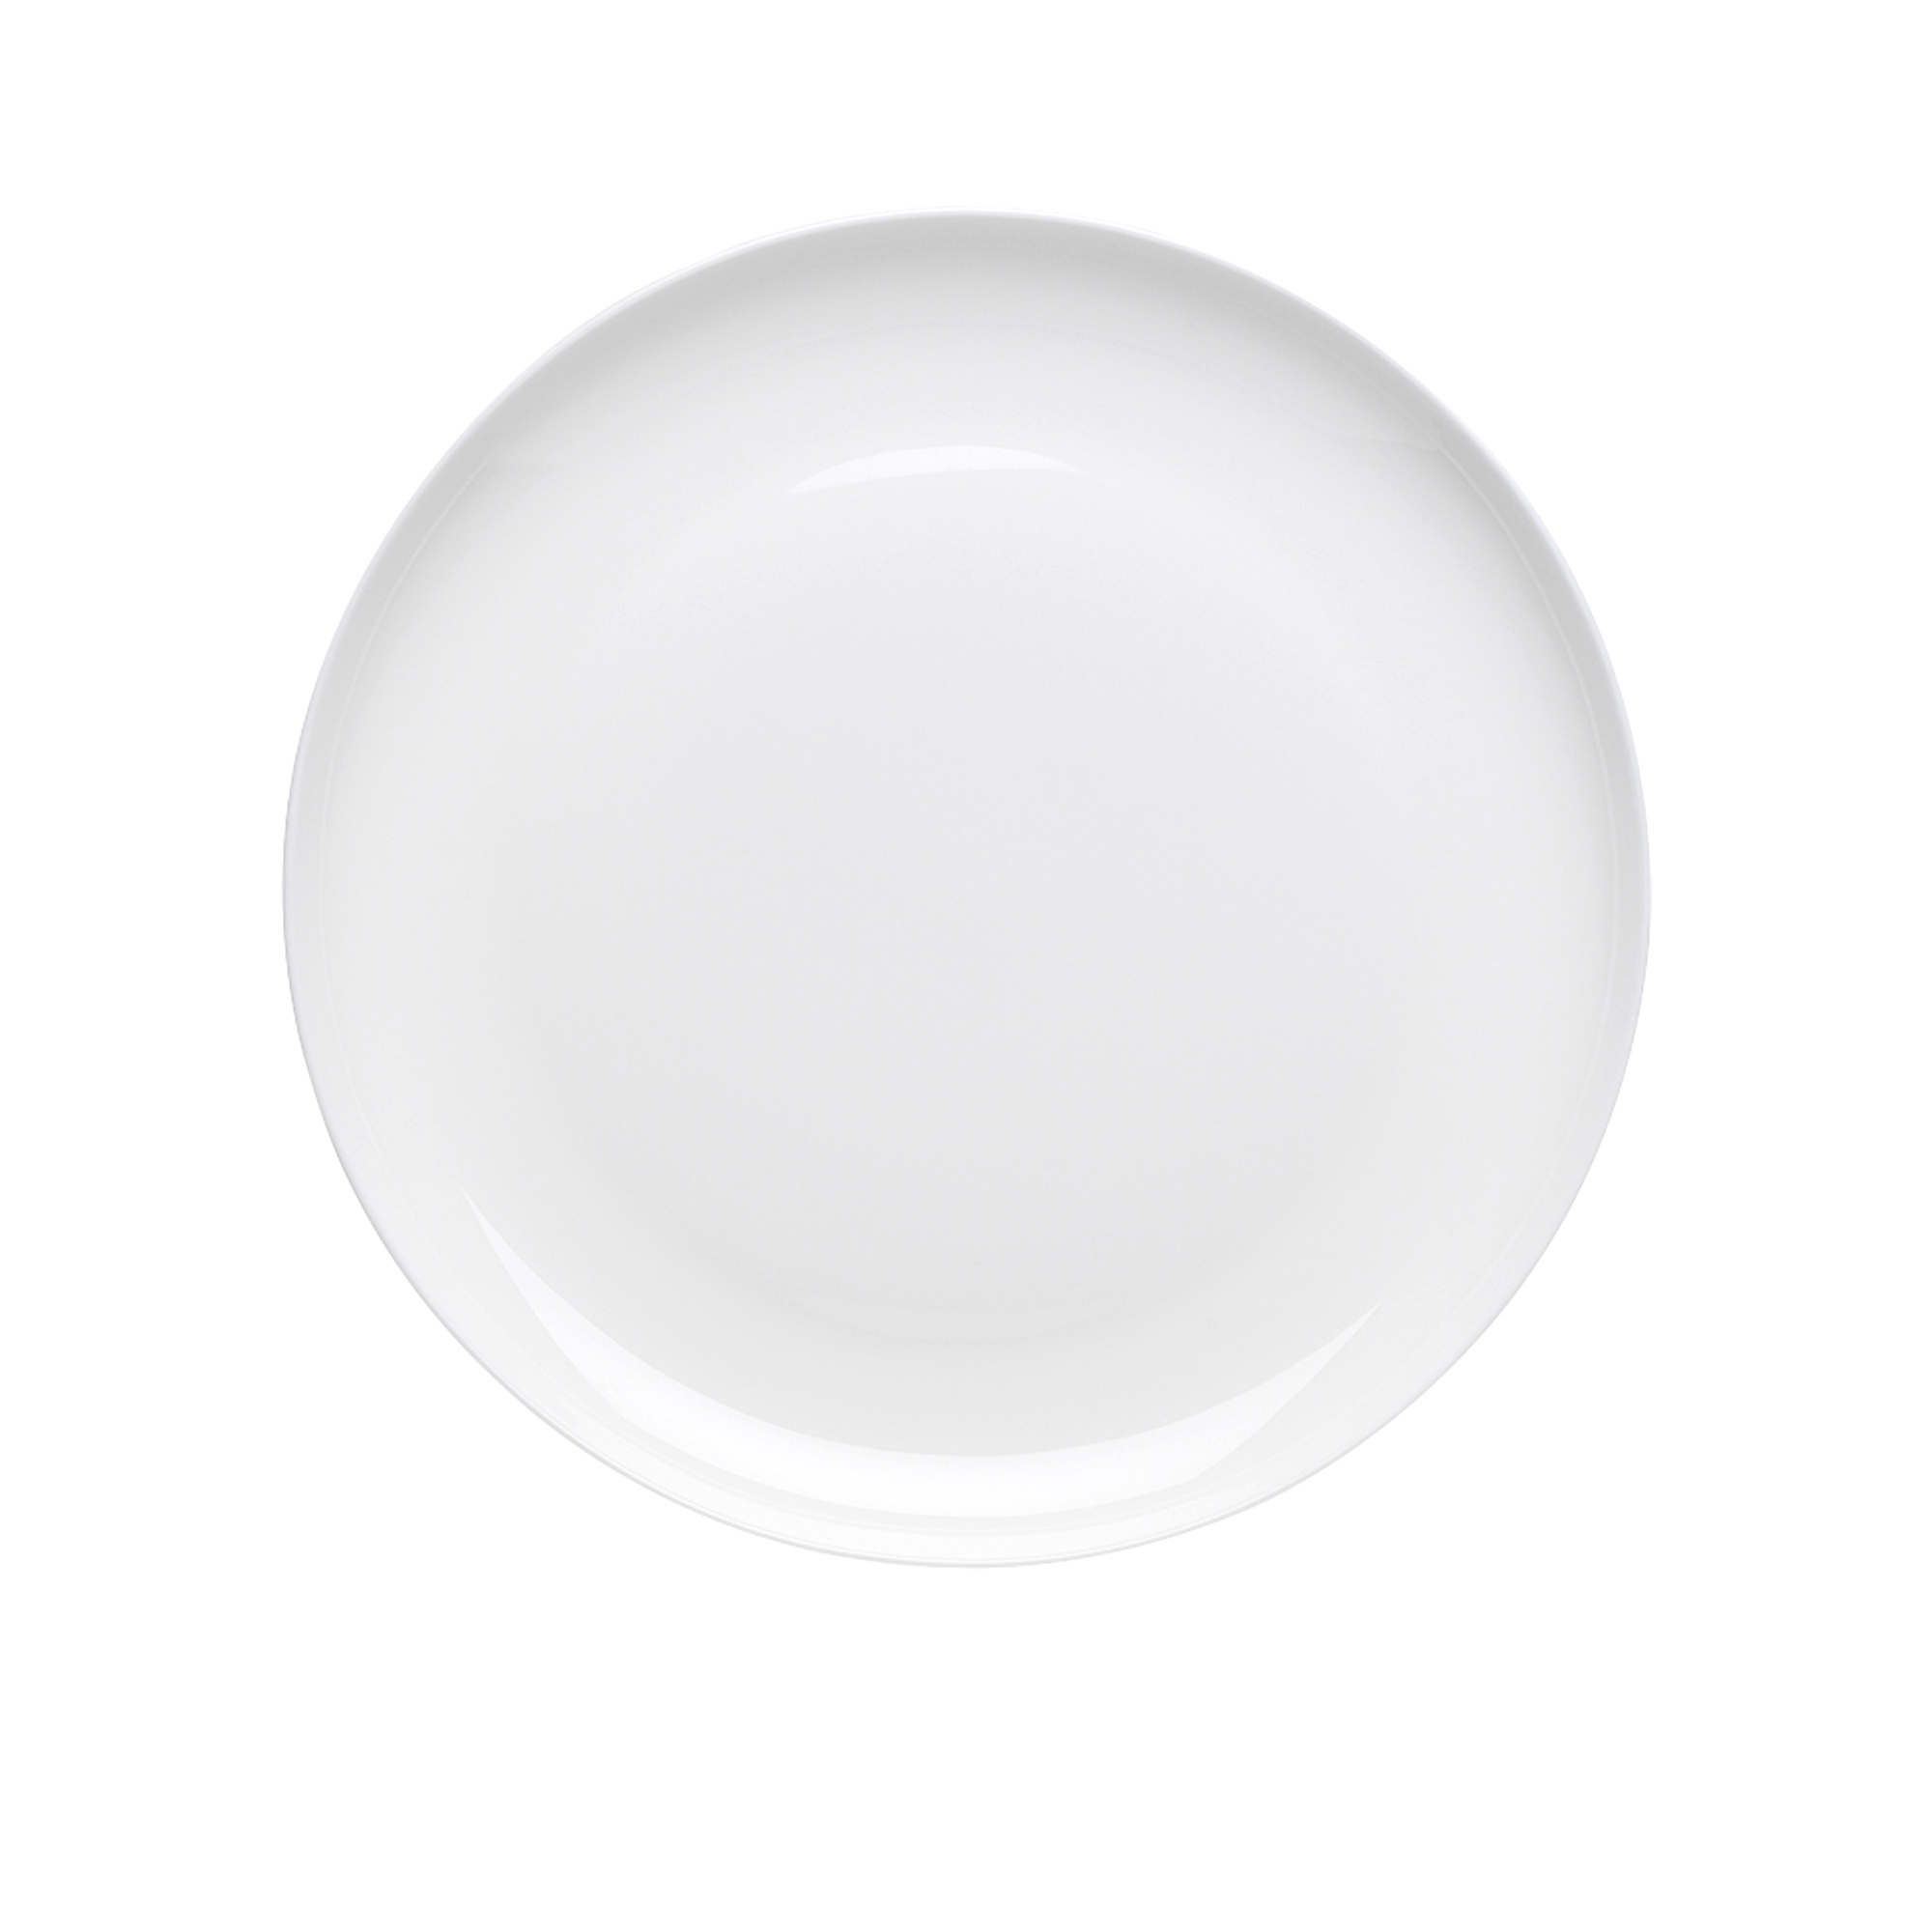 Ecology Canvas Side Plate 21cm White Image 1